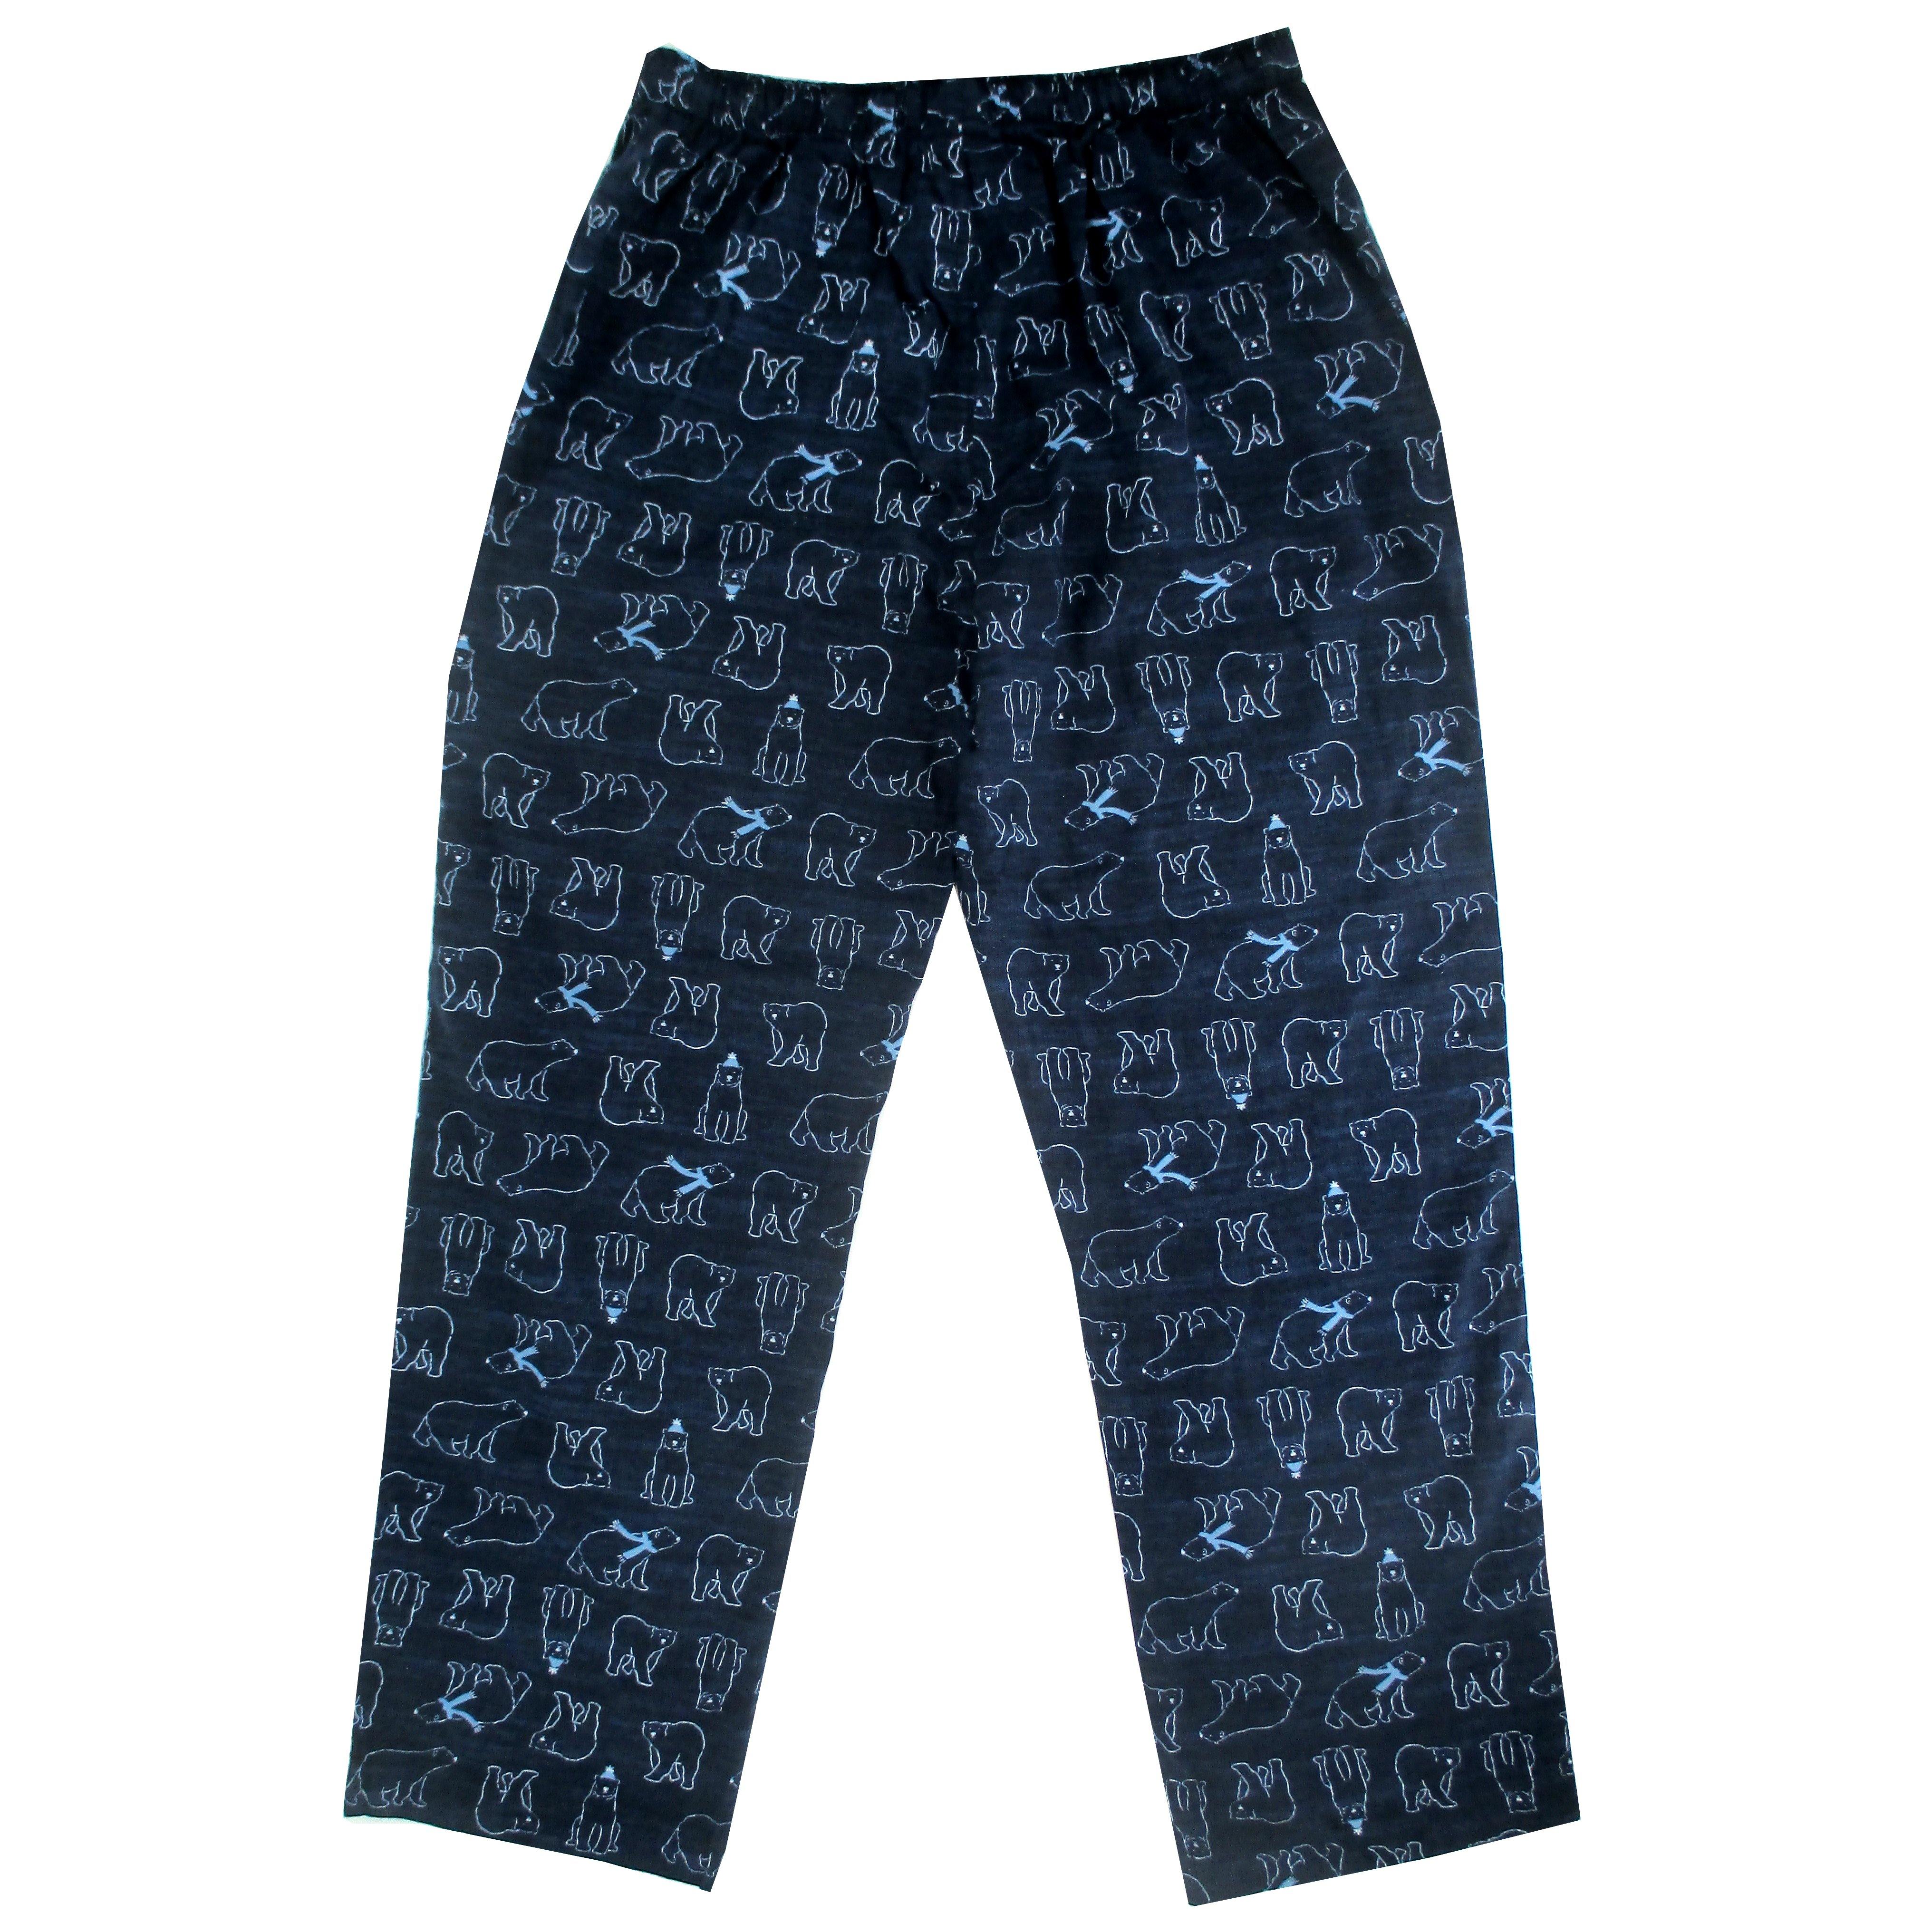 Rock Atoll Soft Comfy Warm Polar Bear Patterned Flannel Pants